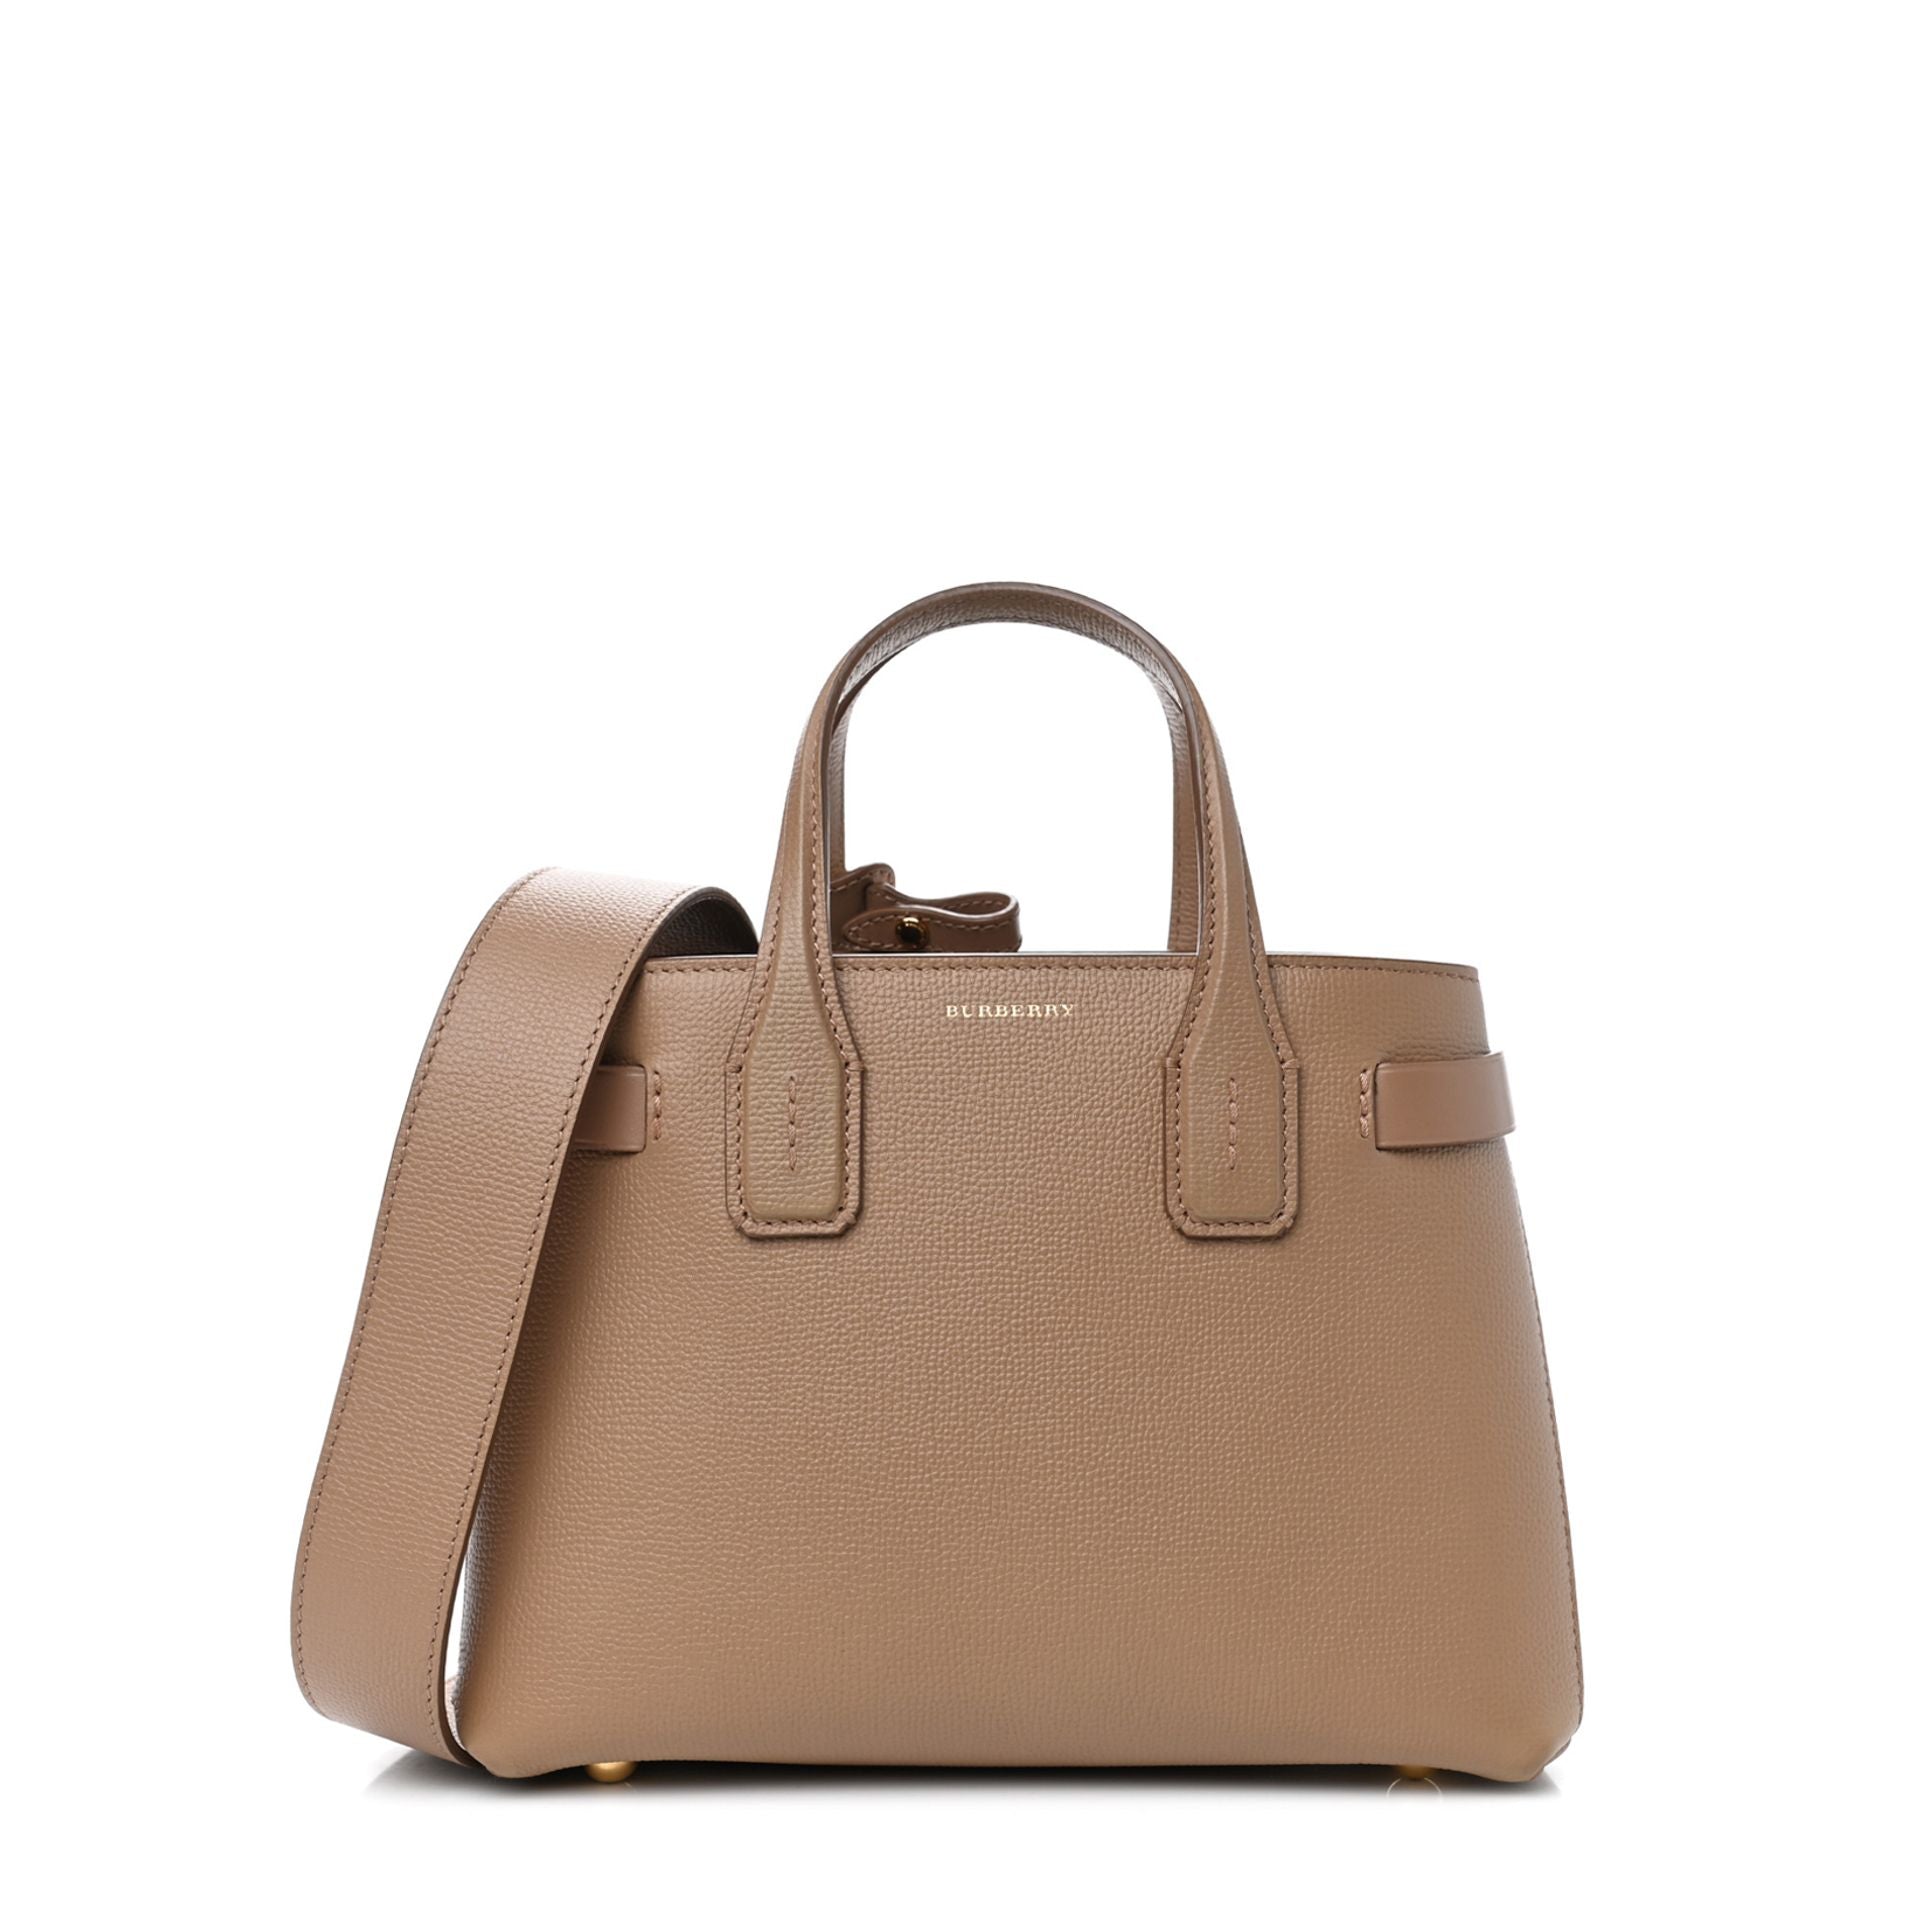 Burberry Leather Shopping Tote Bag Tan